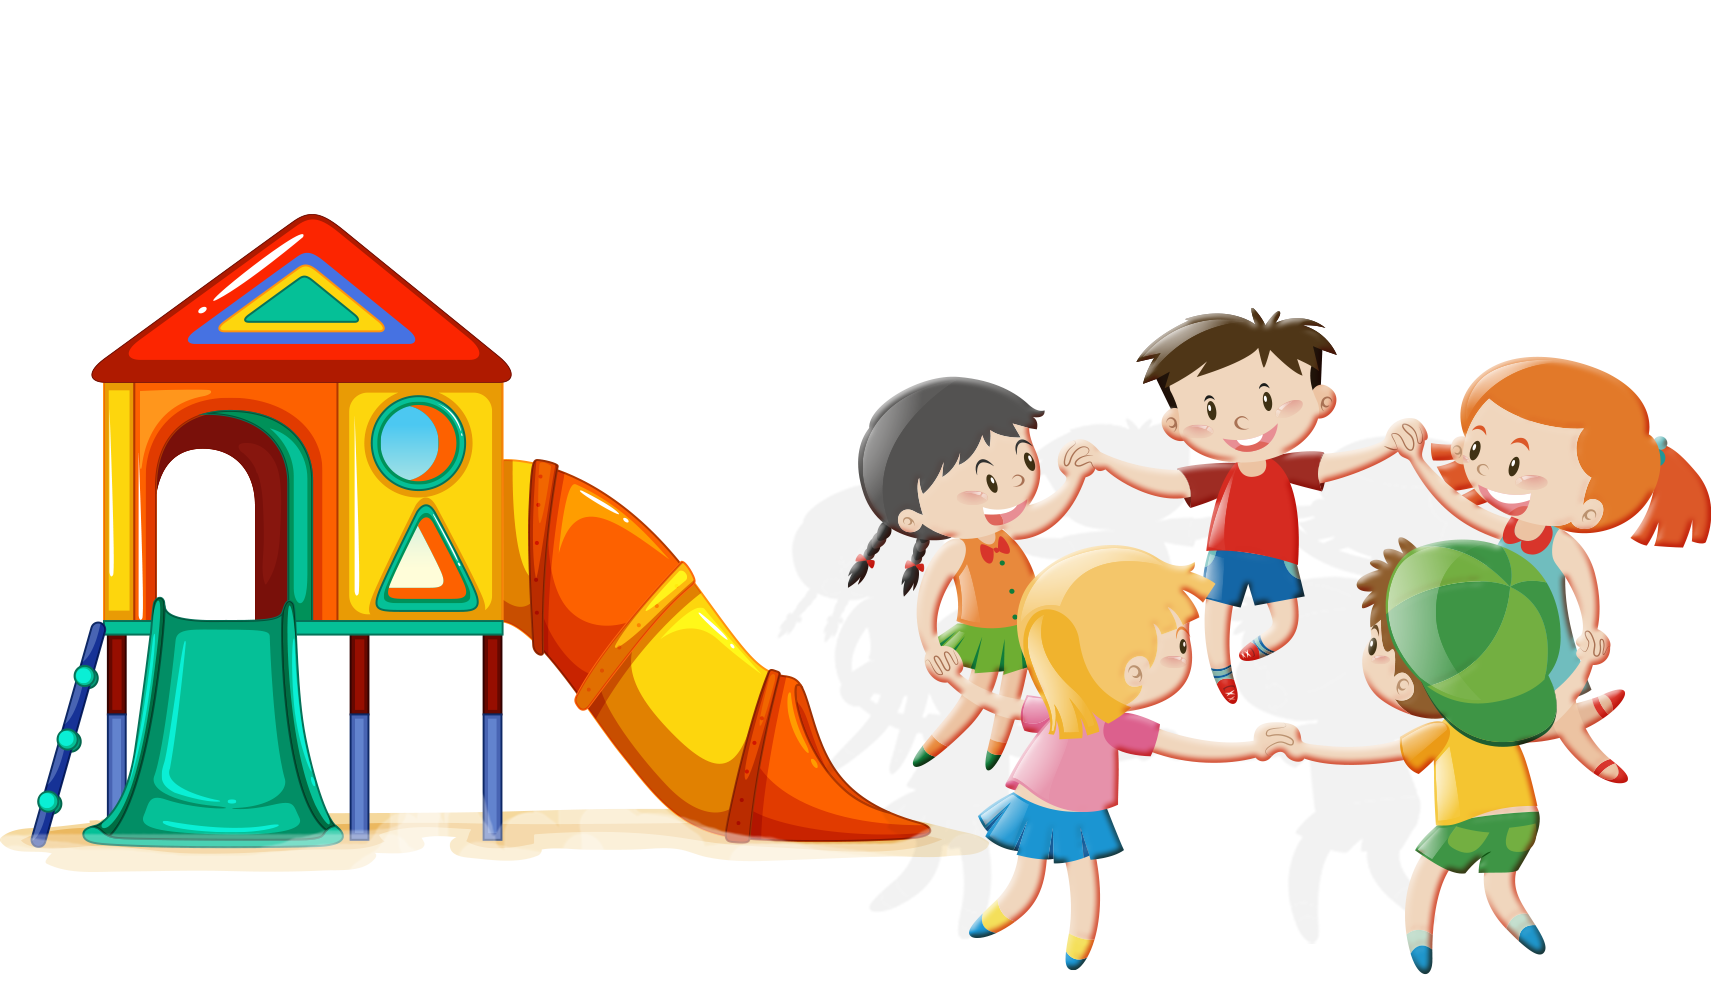 Child play cartoon royalty. Park clipart outdoor toy